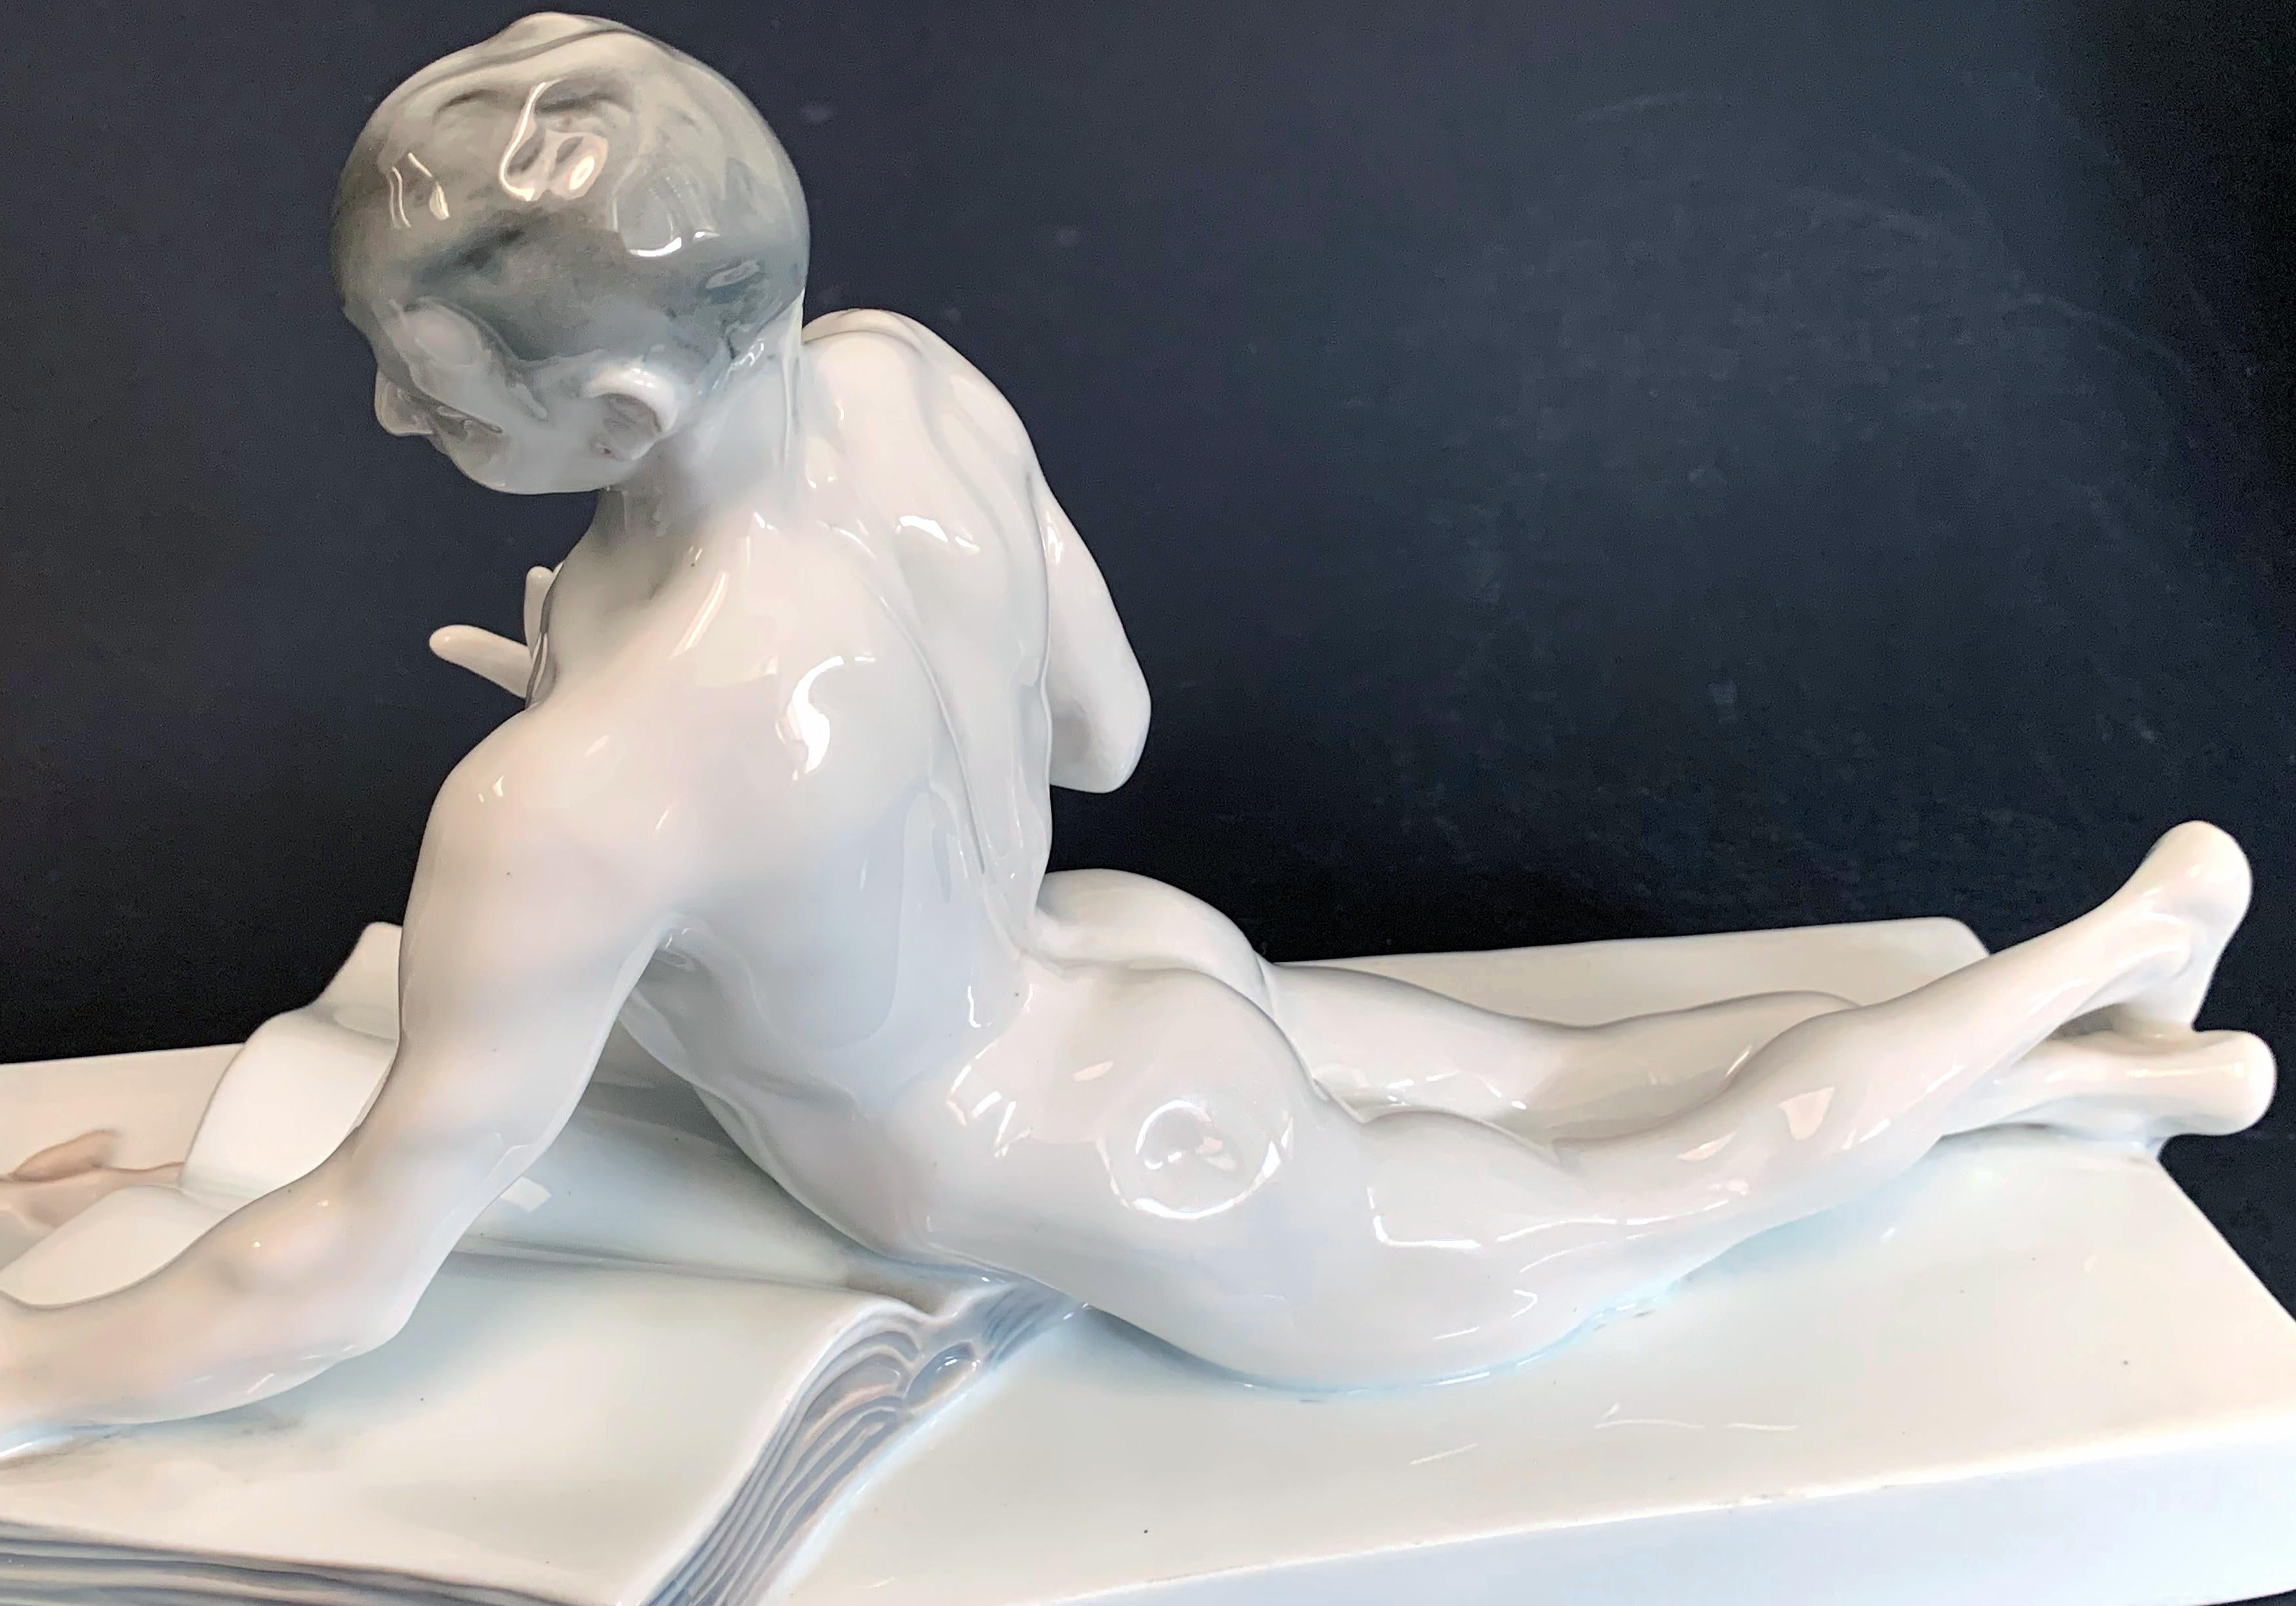 A marvelous combination of whimsy and sensuosity, Ferdinand Liebermann's depiction of a nude youth holding forth with a stork, symbol of wisdom, was first cast in bronze in 1906, and later in porcelain by Rosenthal in 1911. The high gloss of the